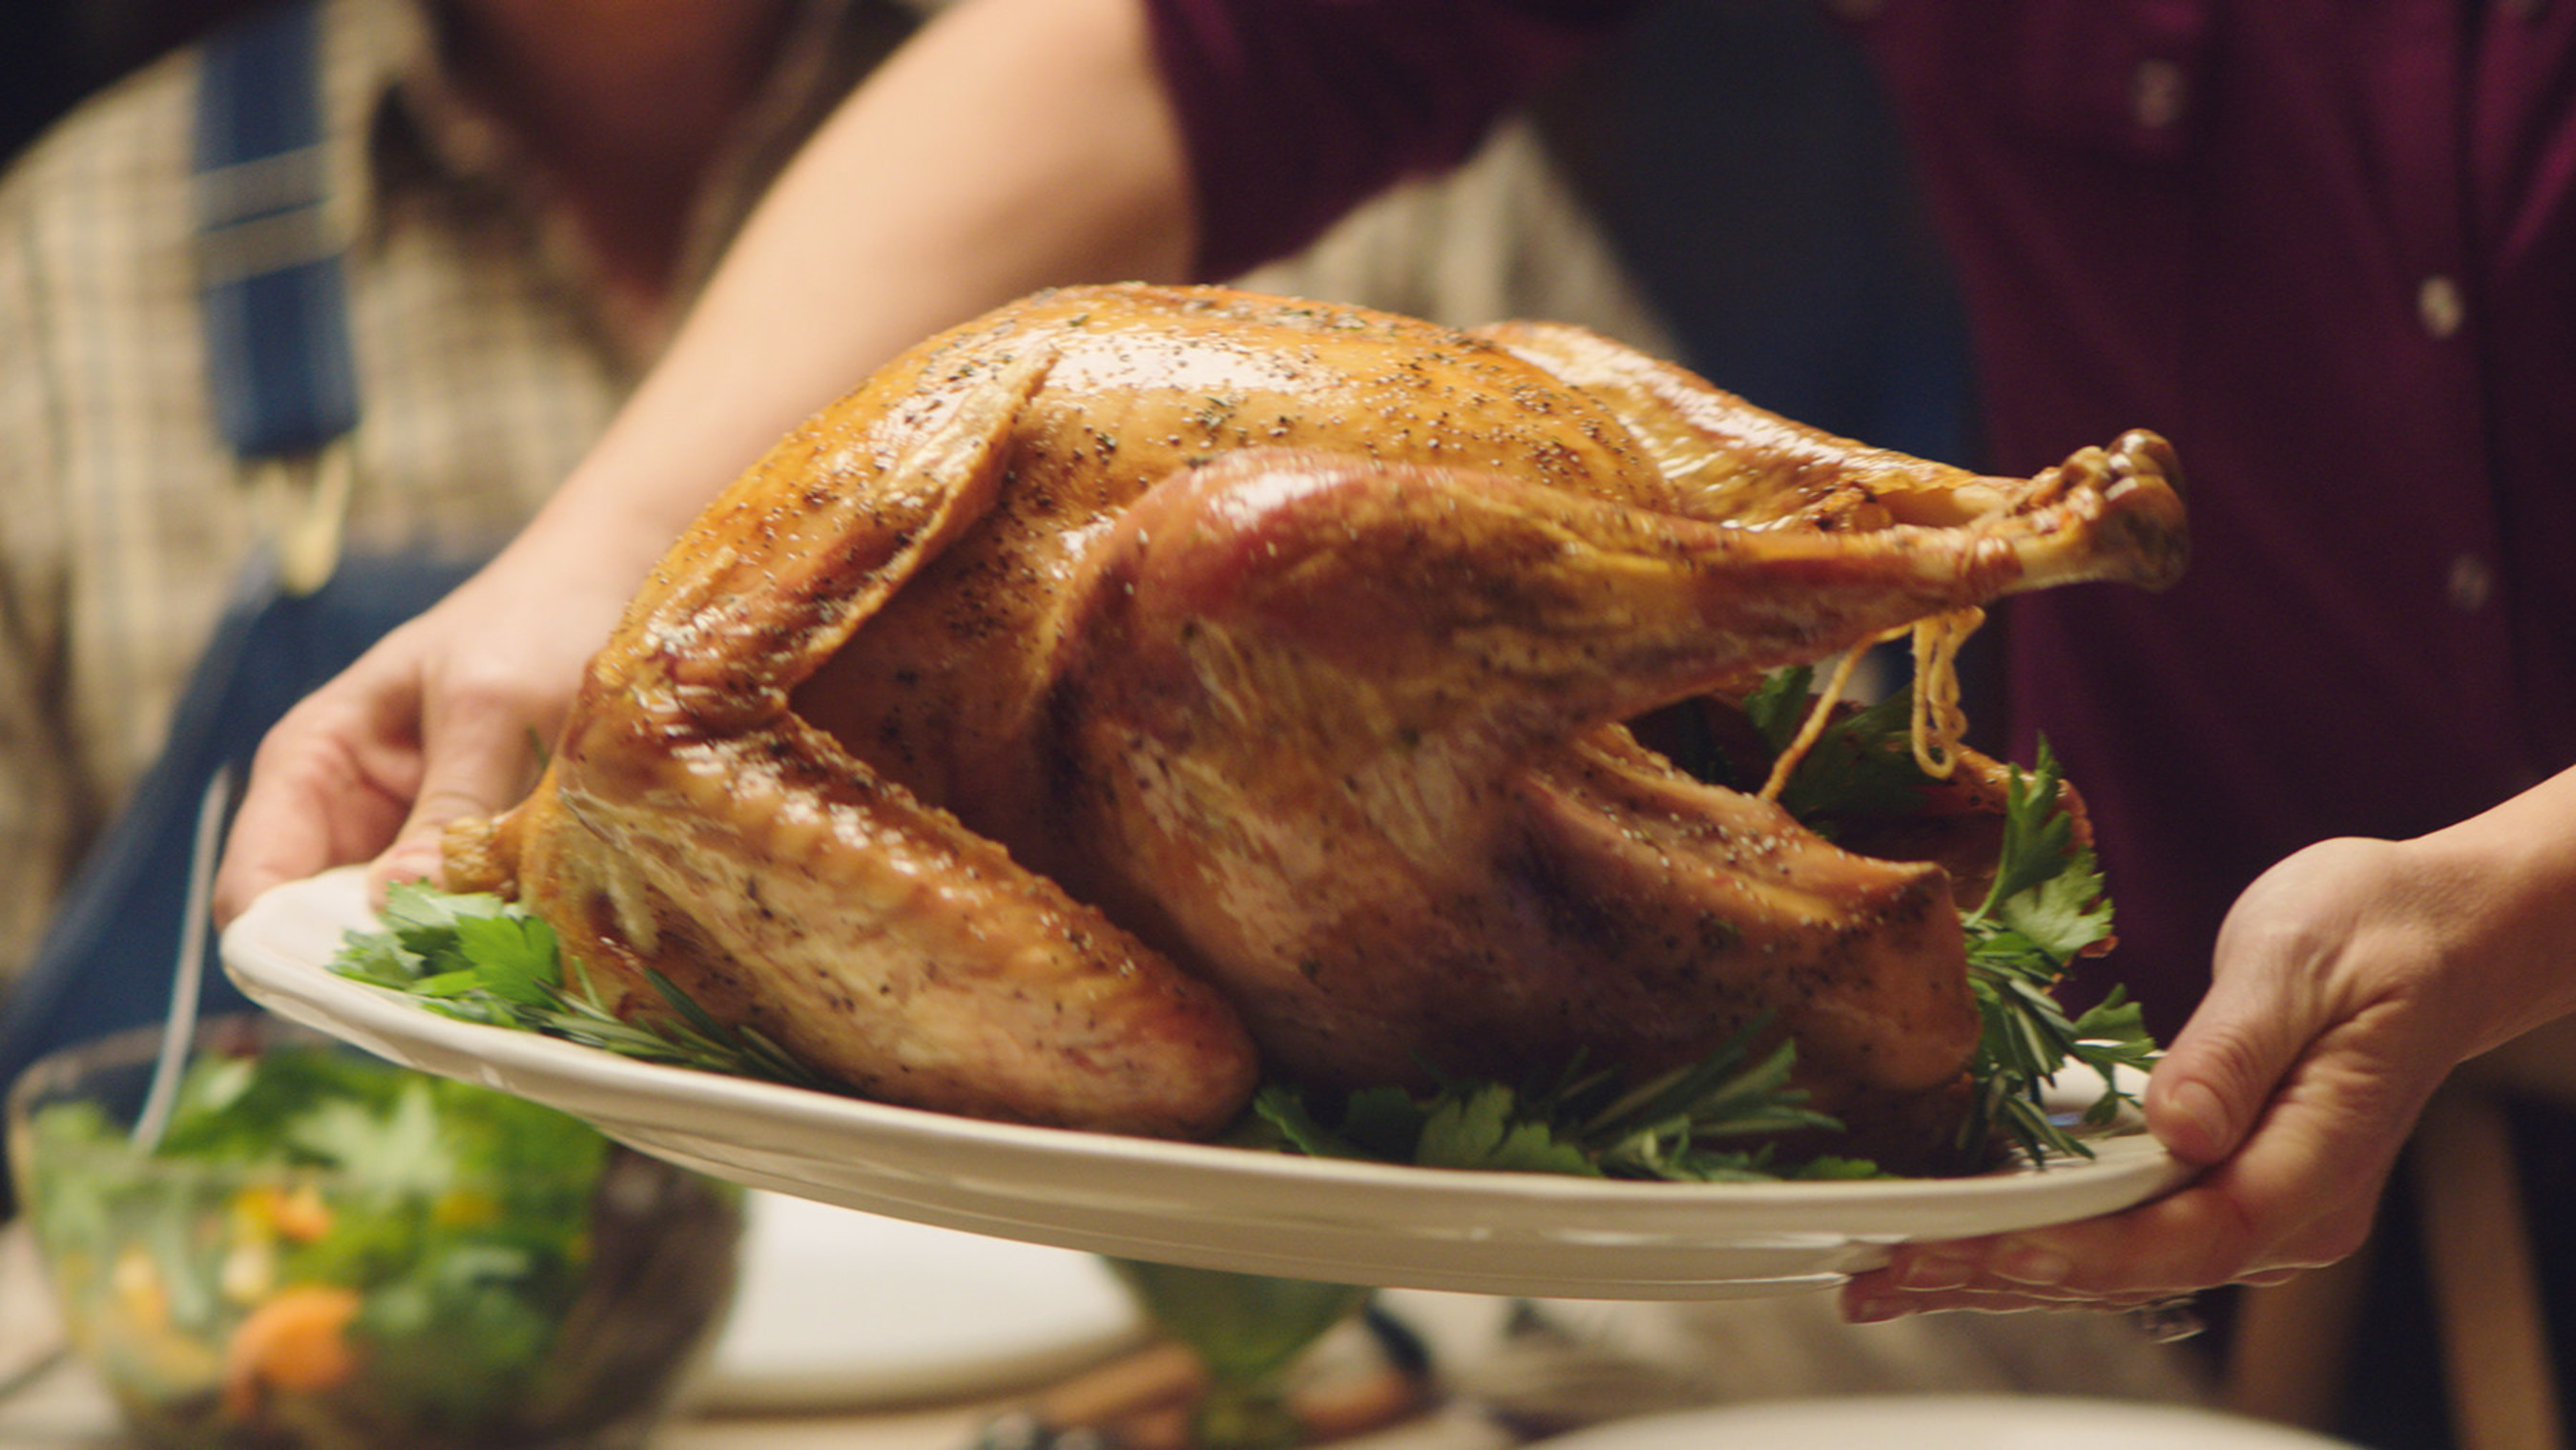 The holiday campaign features independent family farmers who raise turkeys for Honeysuckle White and Shady Brook Farms, instead of actors, providing authenticity and transparency that is underscored by the Honest. Simple. Turkey(R) tagline.